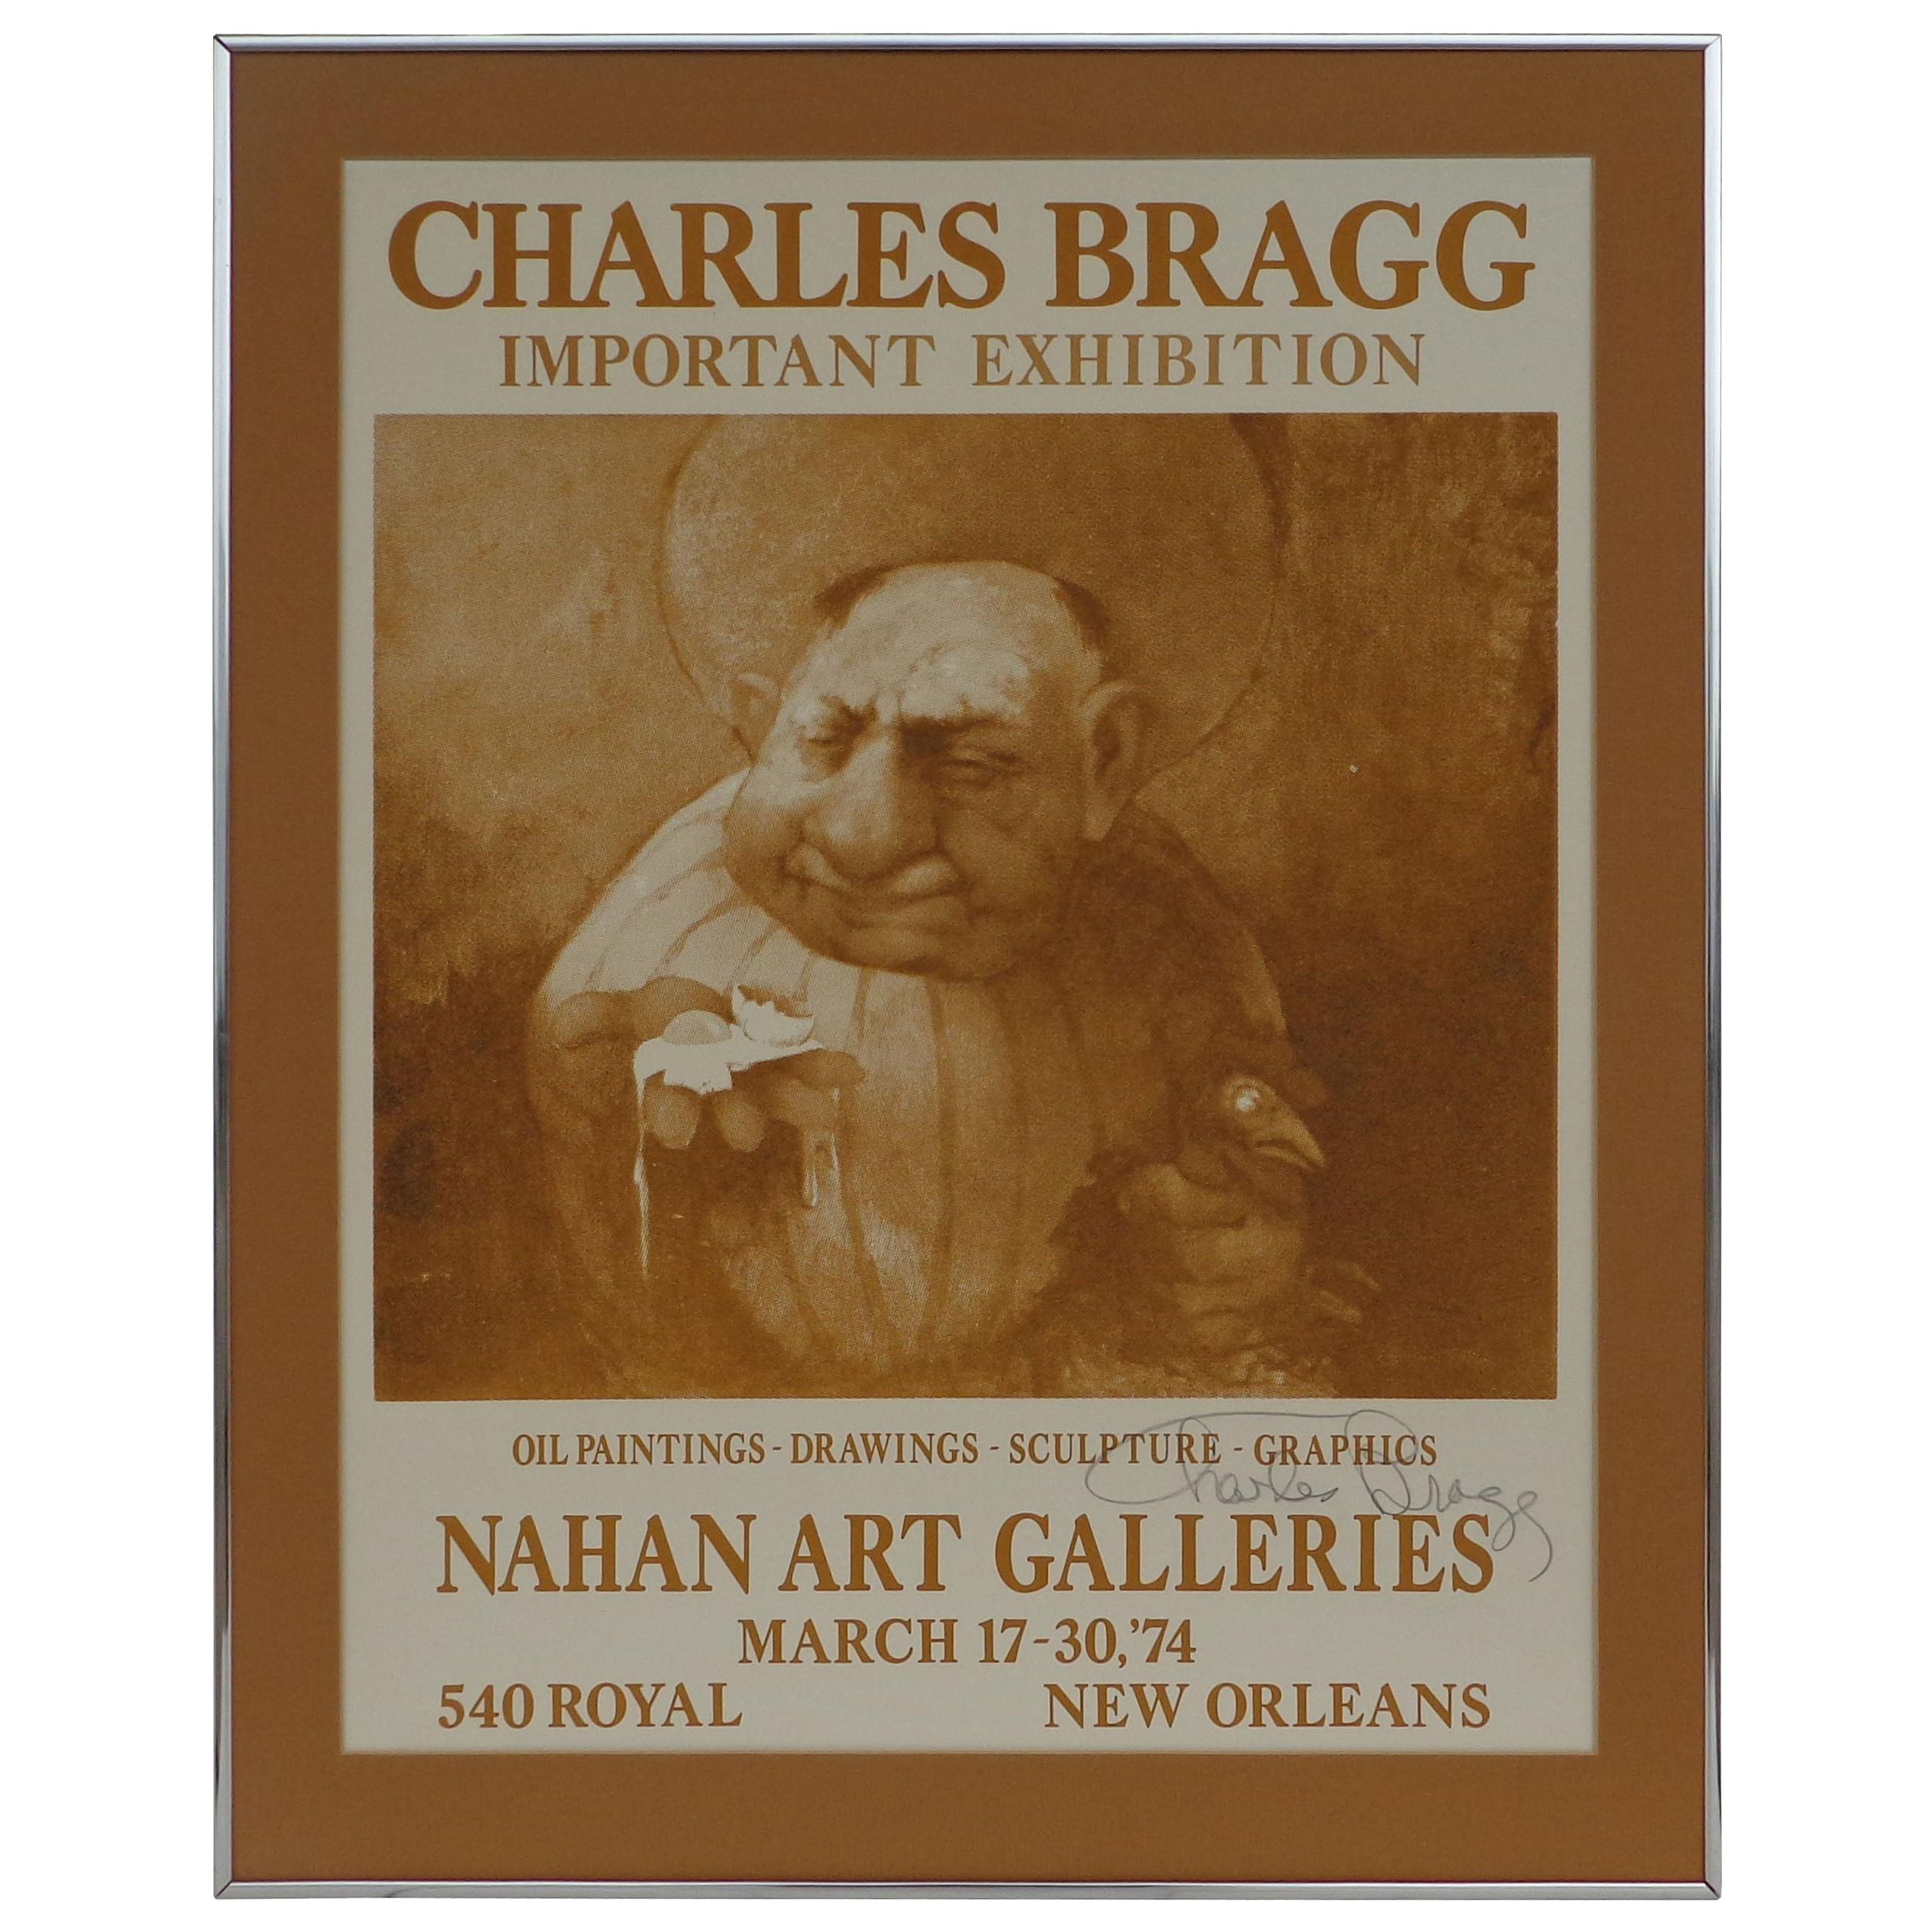 Signed 1974 Charles Bragg New Orleans "Important Exhibition" Poster For Sale